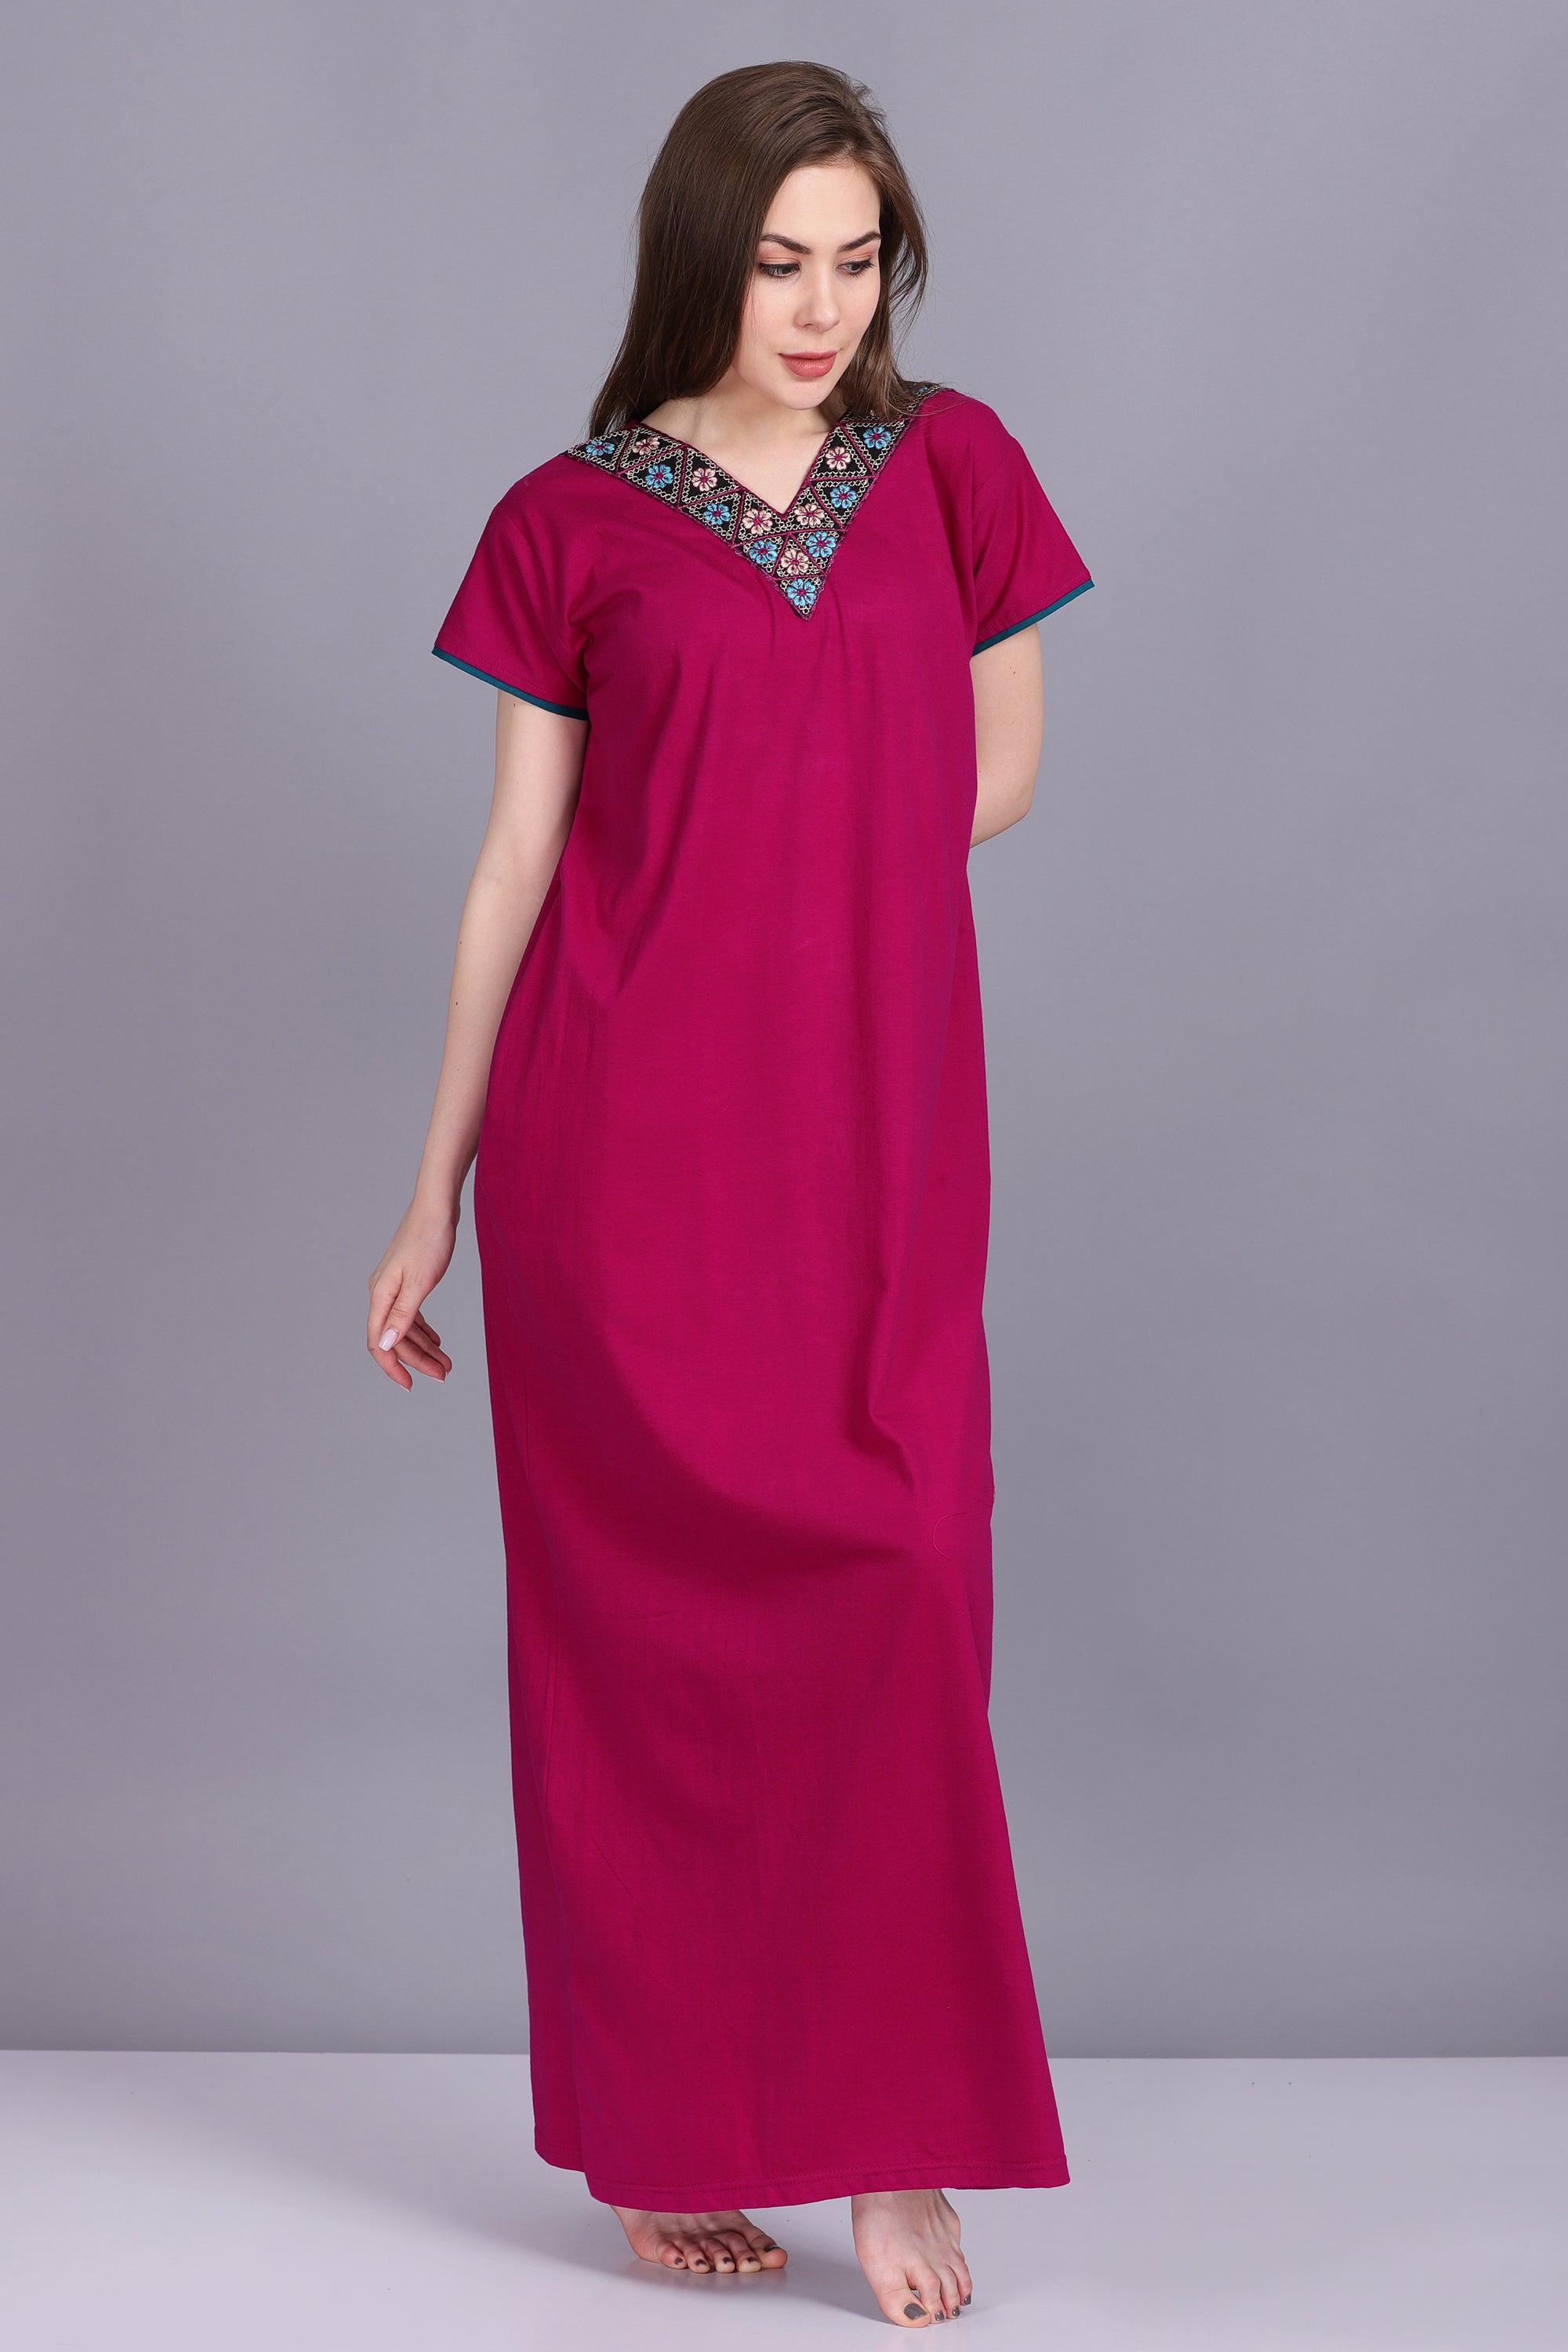 BAILEY SELLS Satin Nighty & Night Gowns - Pink | Night dress online, Night  gown, Night dress